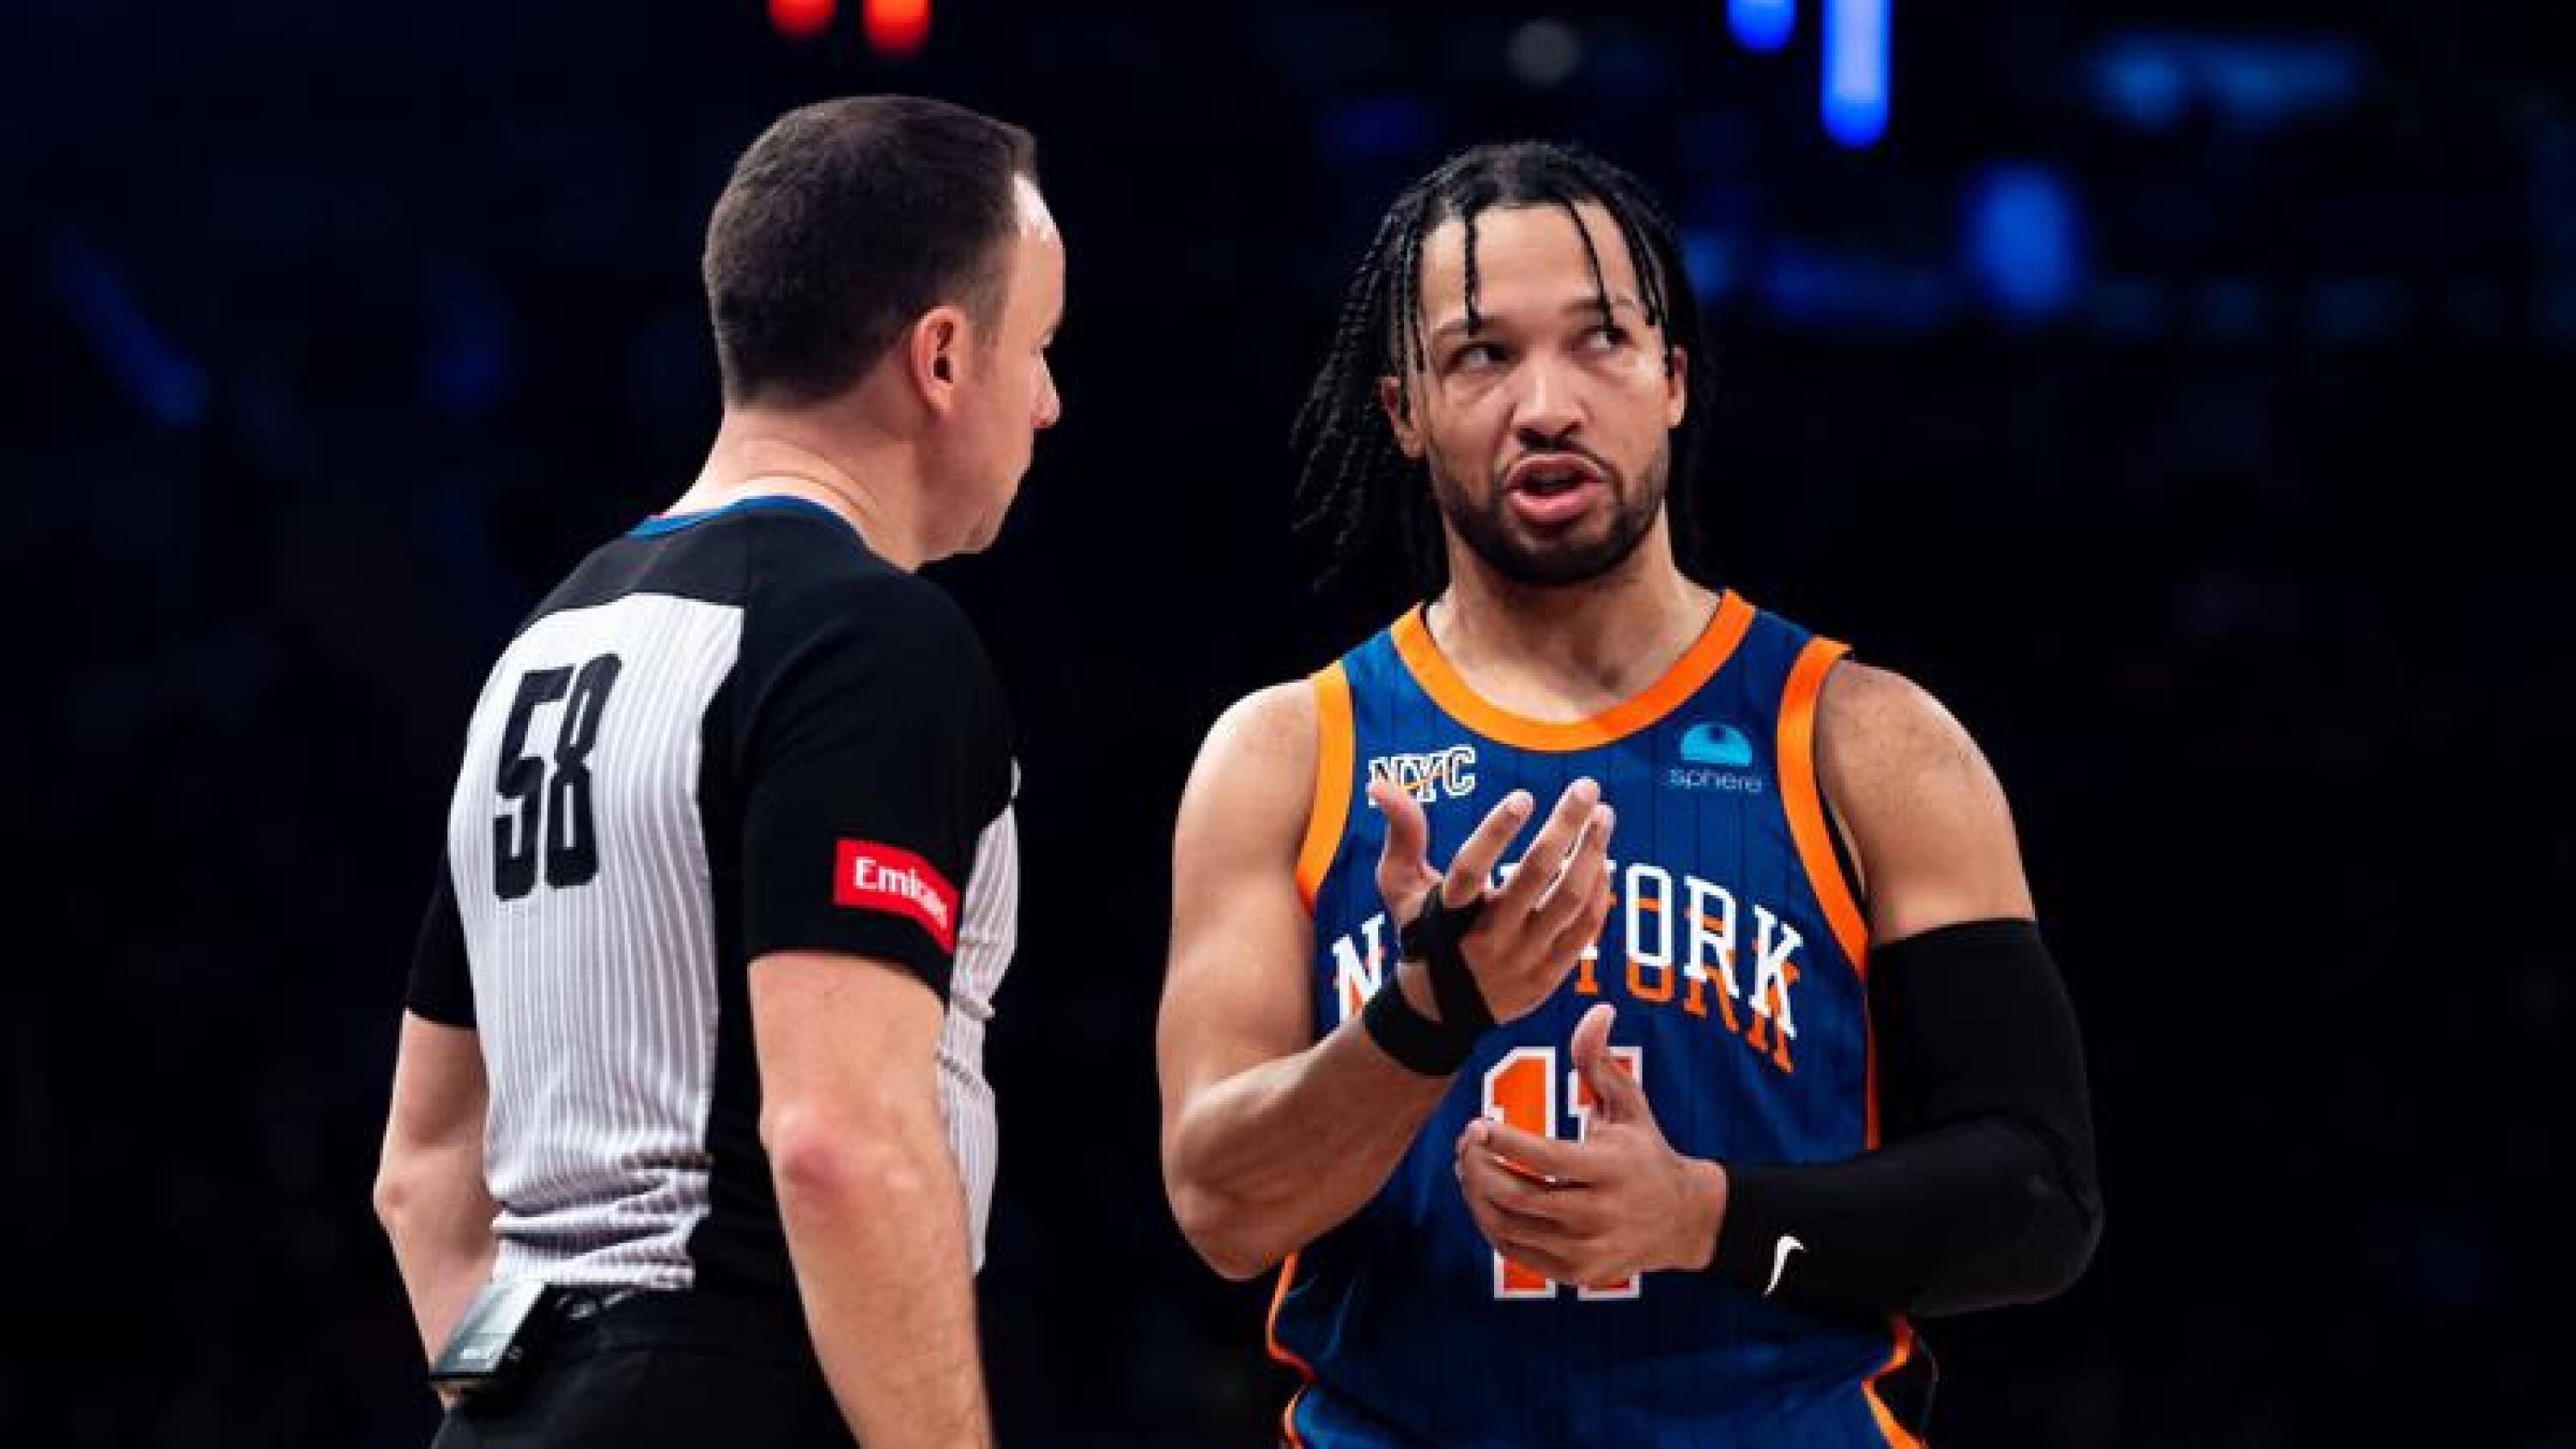 DiVincenzo scores 31 points as New York Knicks beat Brooklyn Nets 105-93